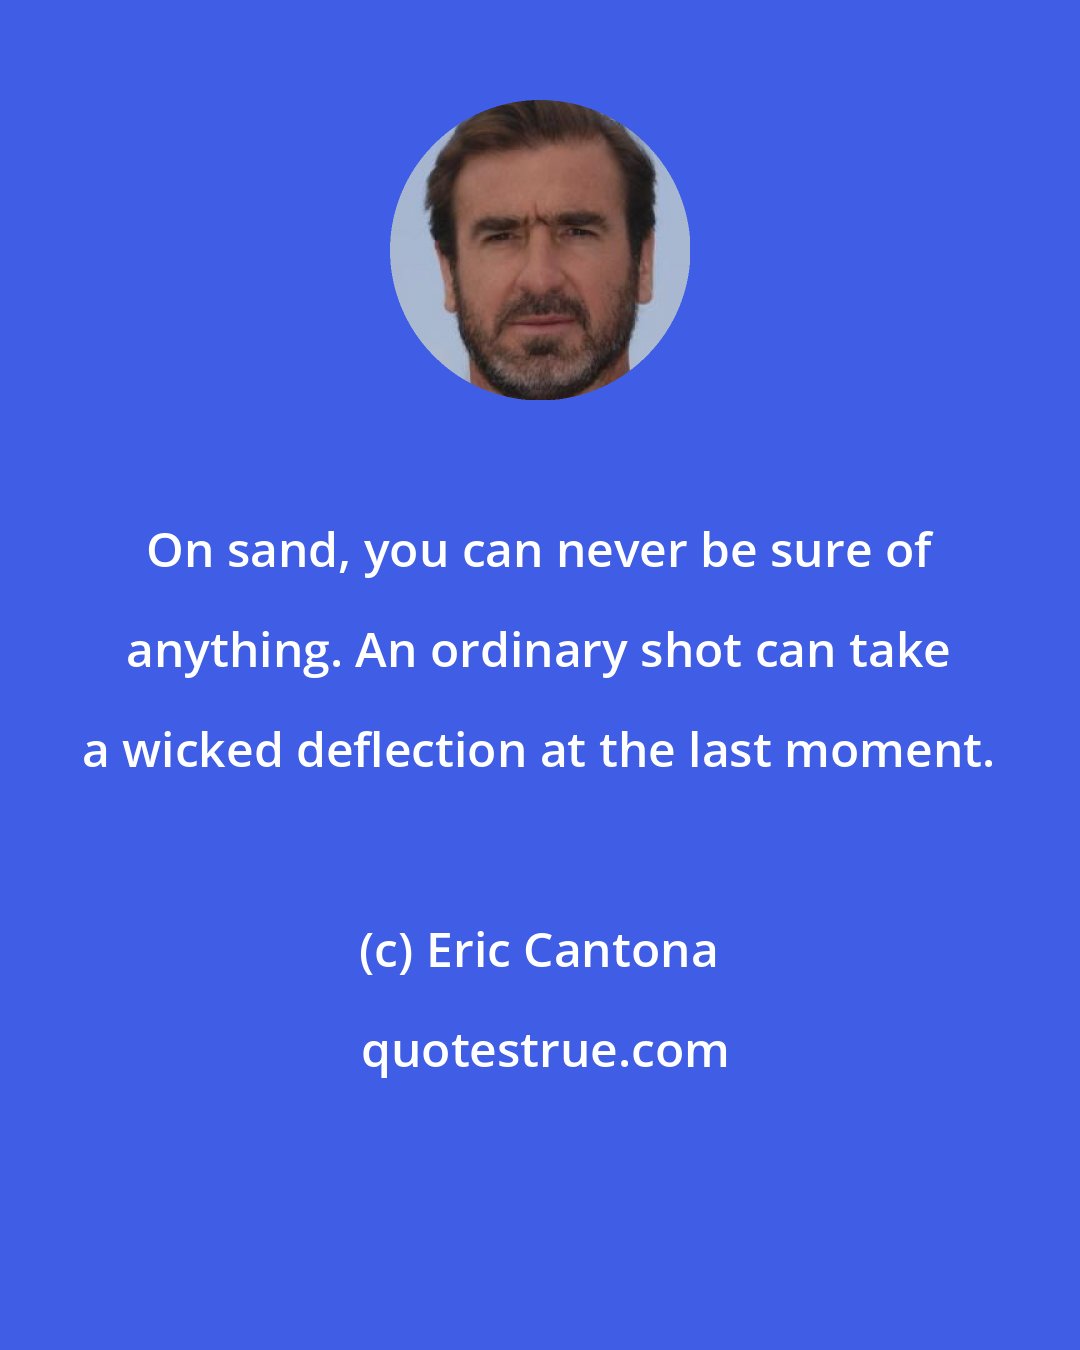 Eric Cantona: On sand, you can never be sure of anything. An ordinary shot can take a wicked deflection at the last moment.